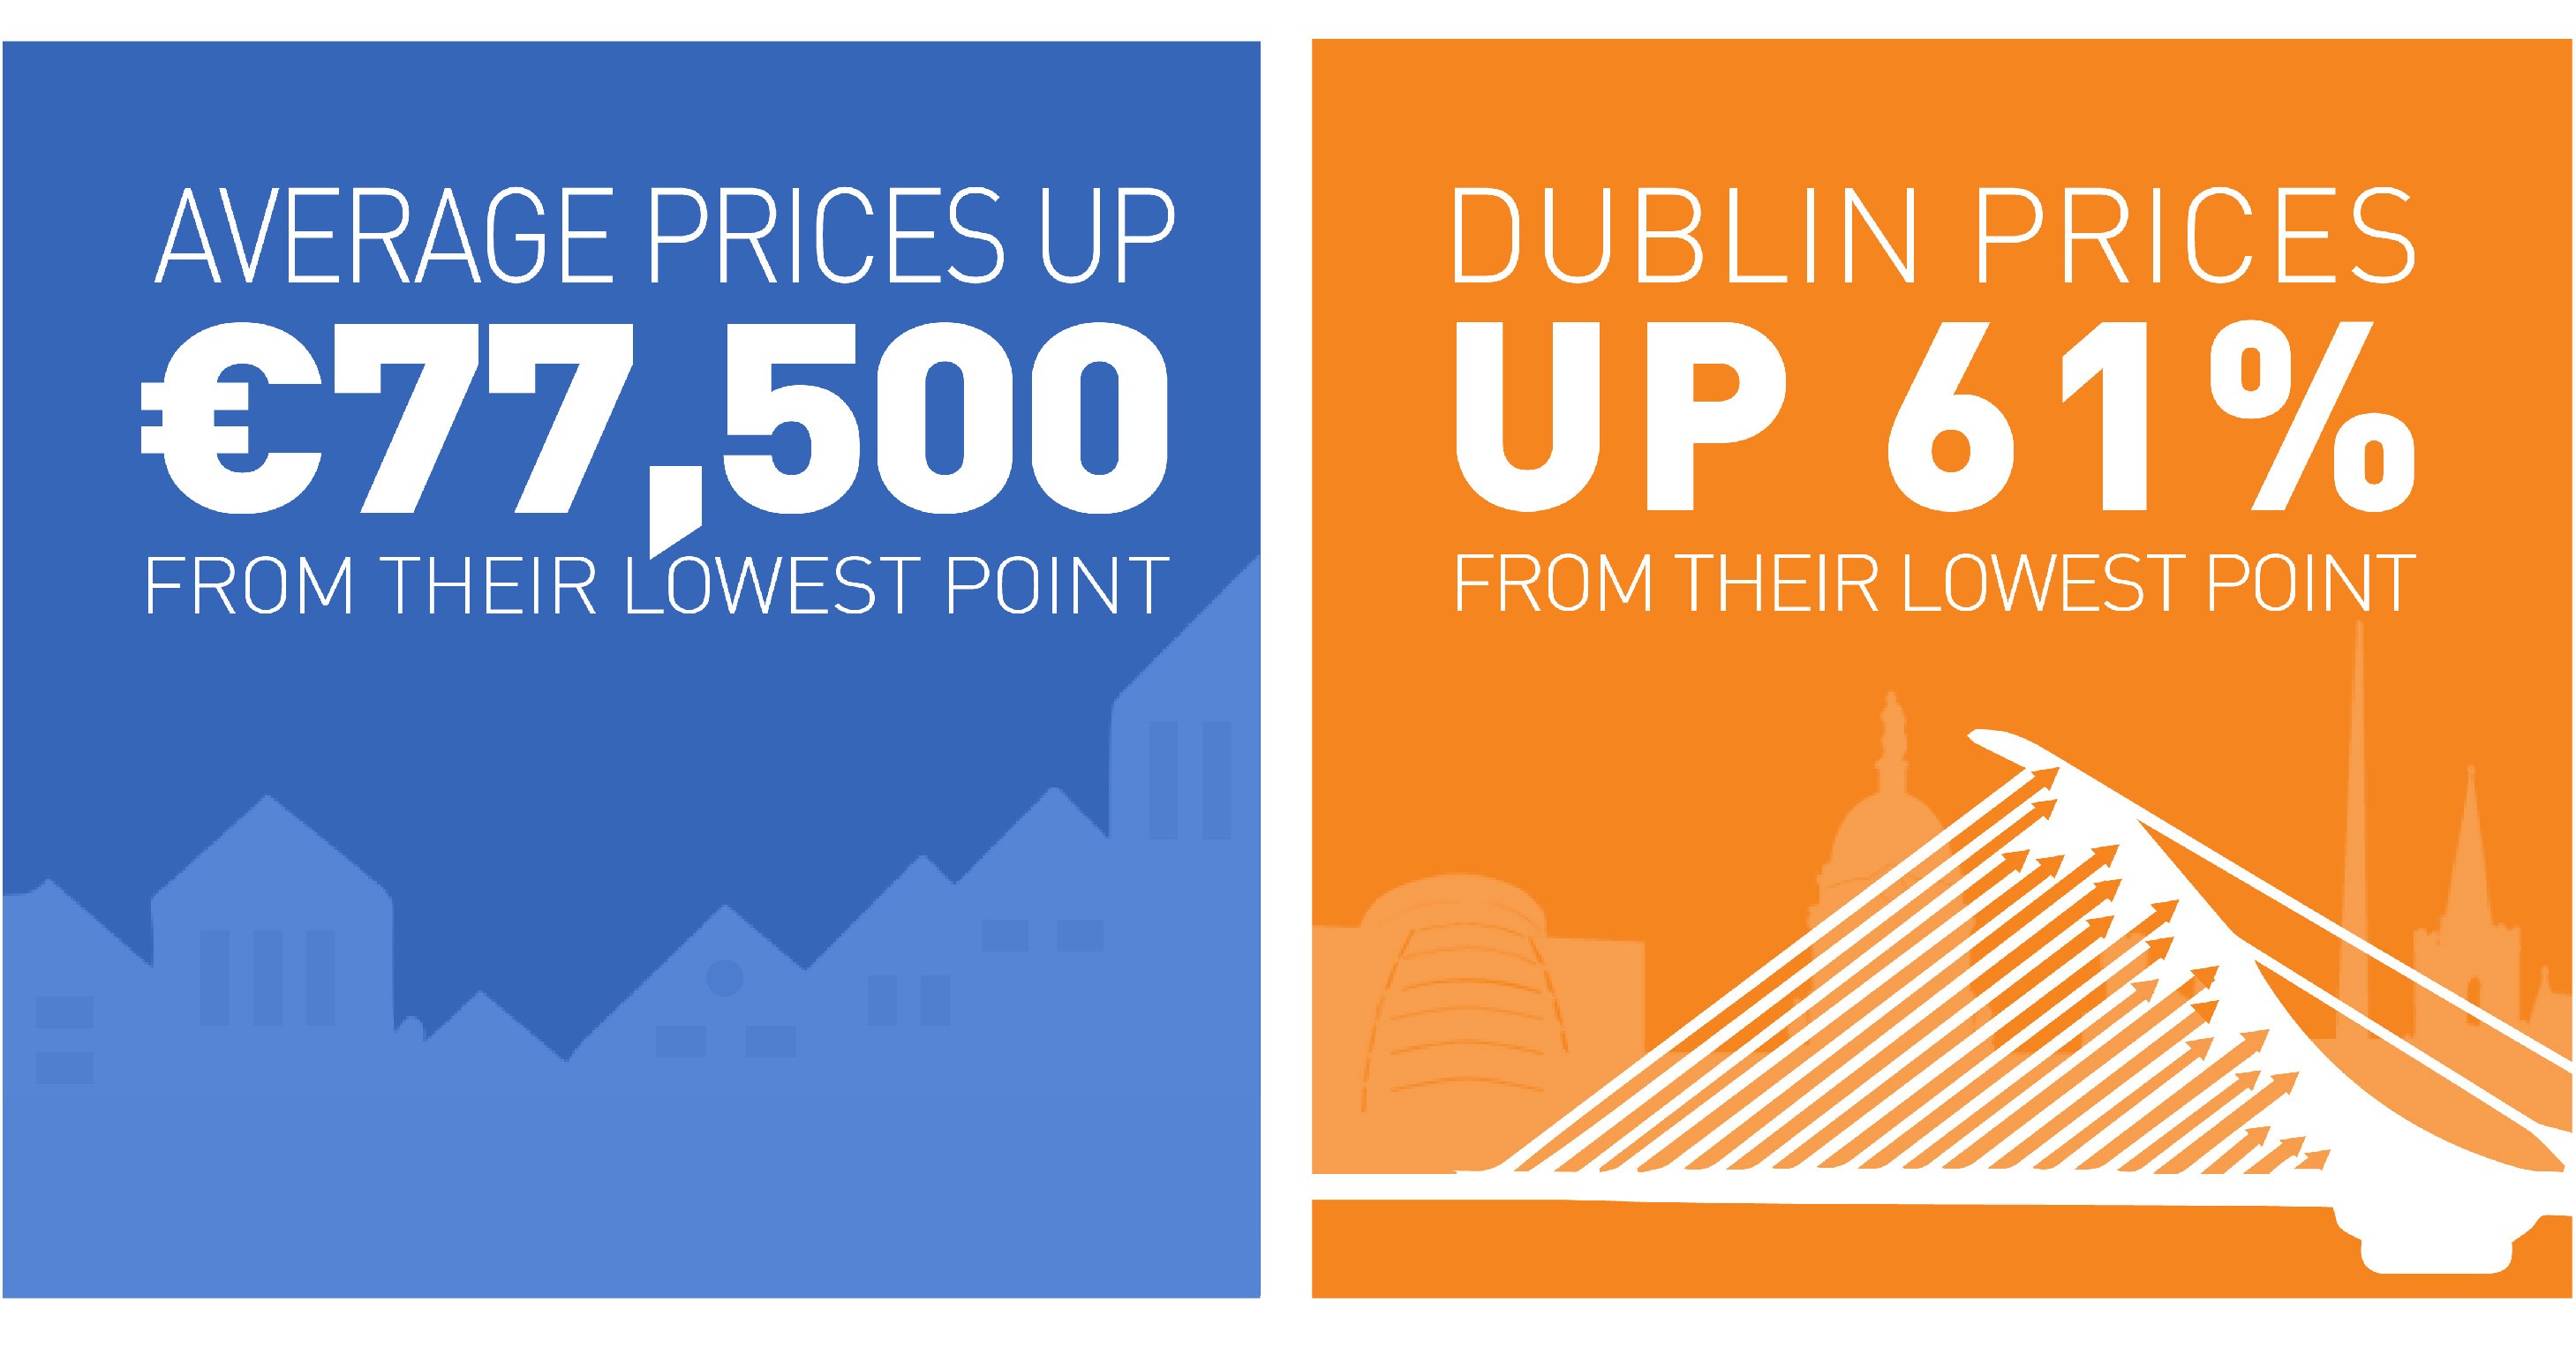 Average prices up €77,500 from their lowest point